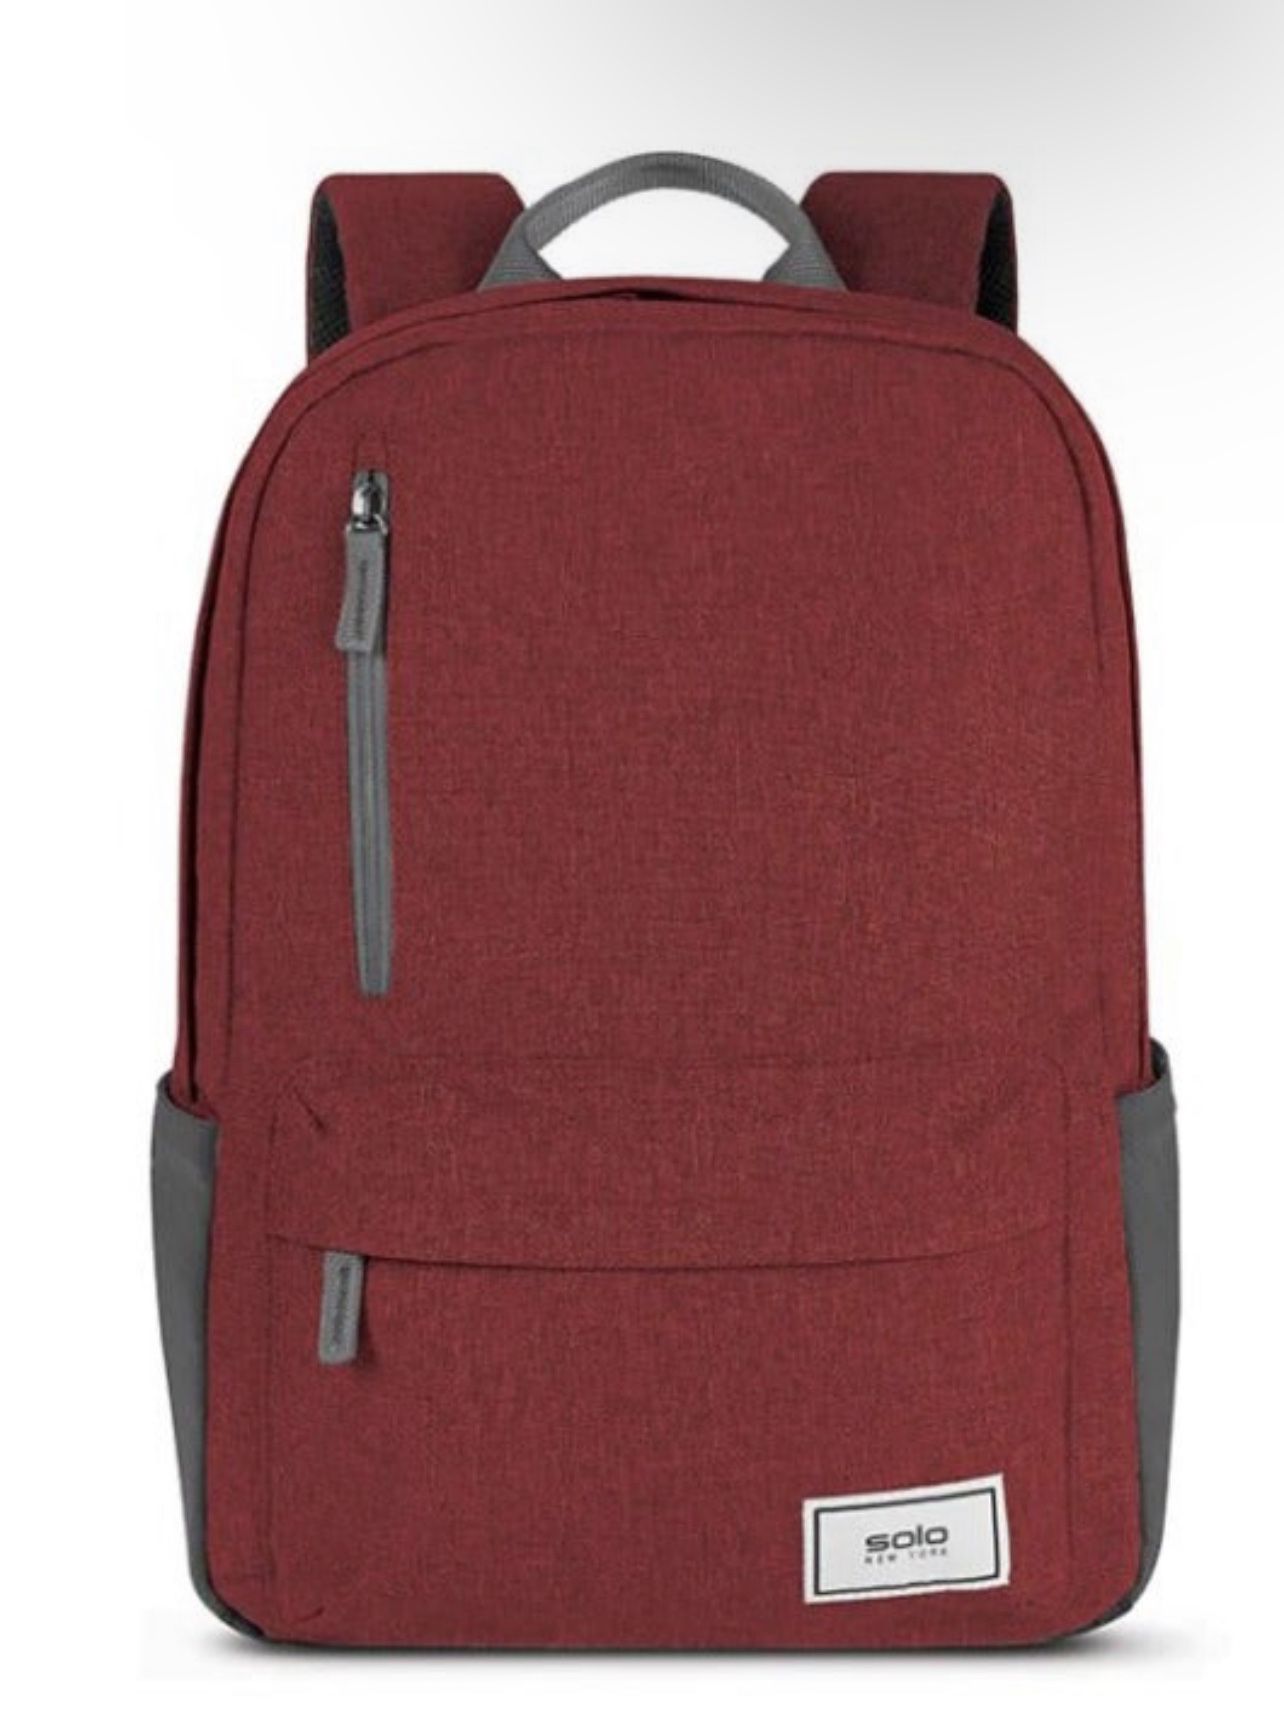 SOLO Re:cover Backpack